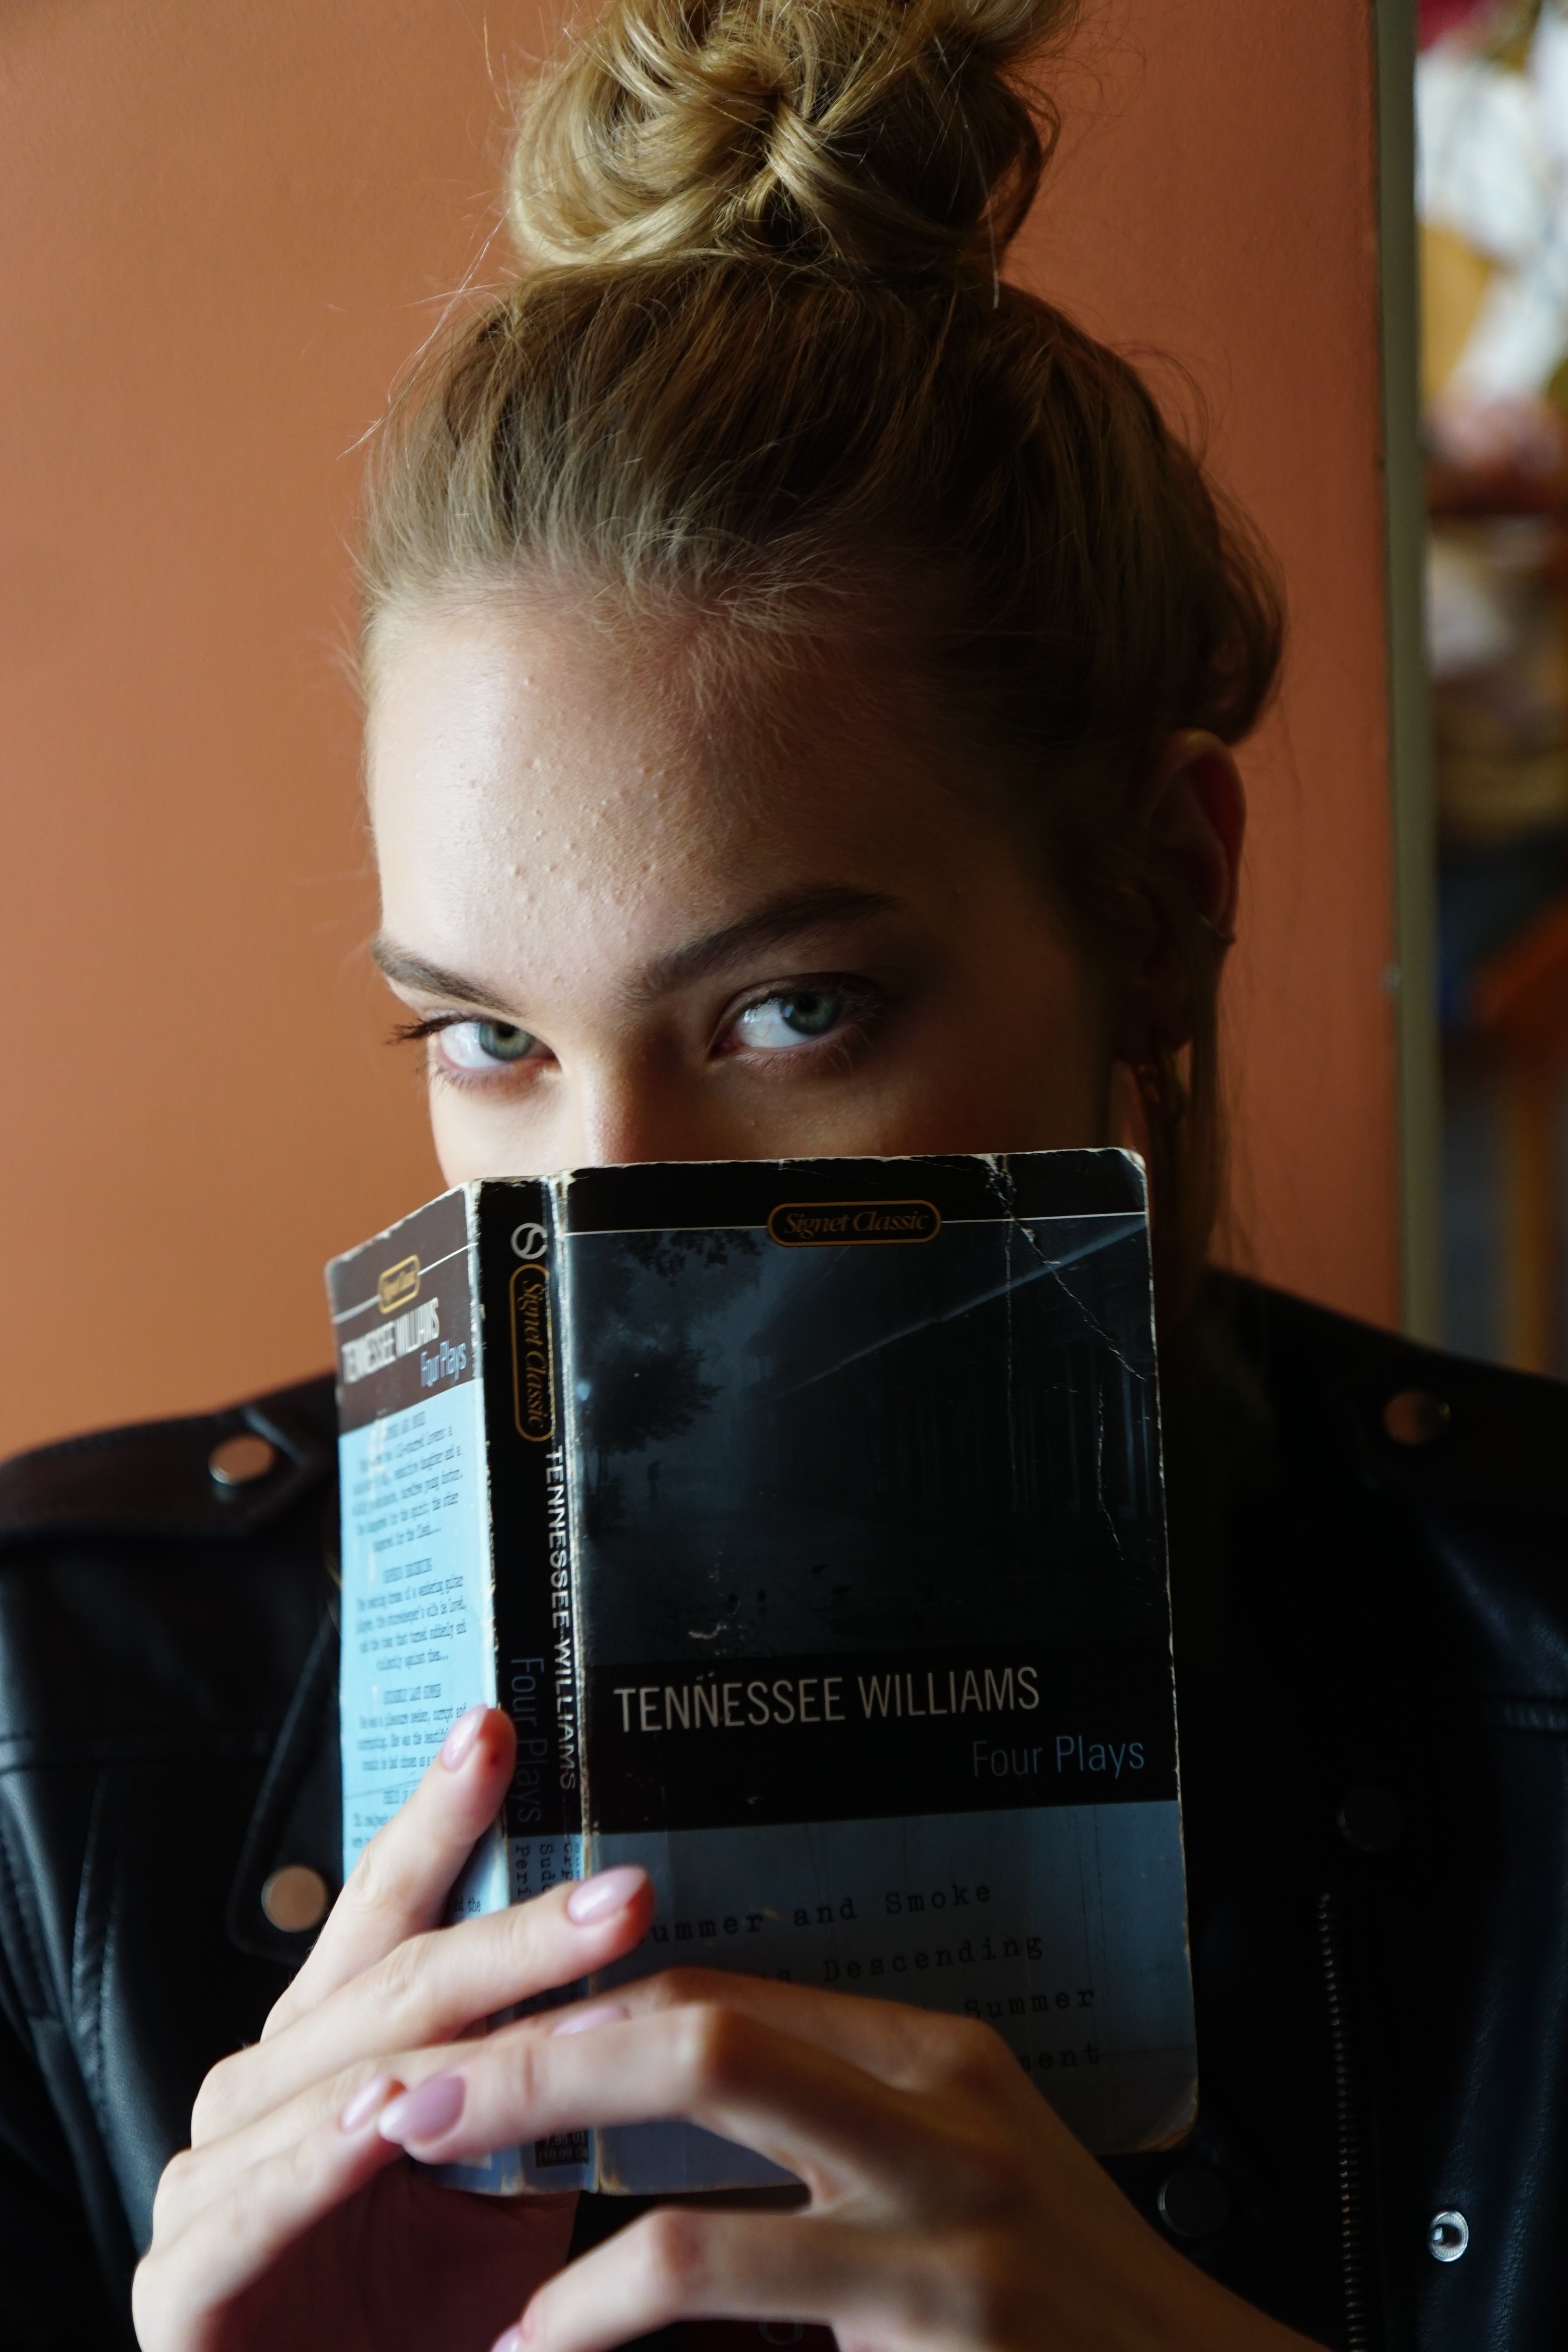 A woman holding a book in front of the bottom half of her face. | Source: Pexels